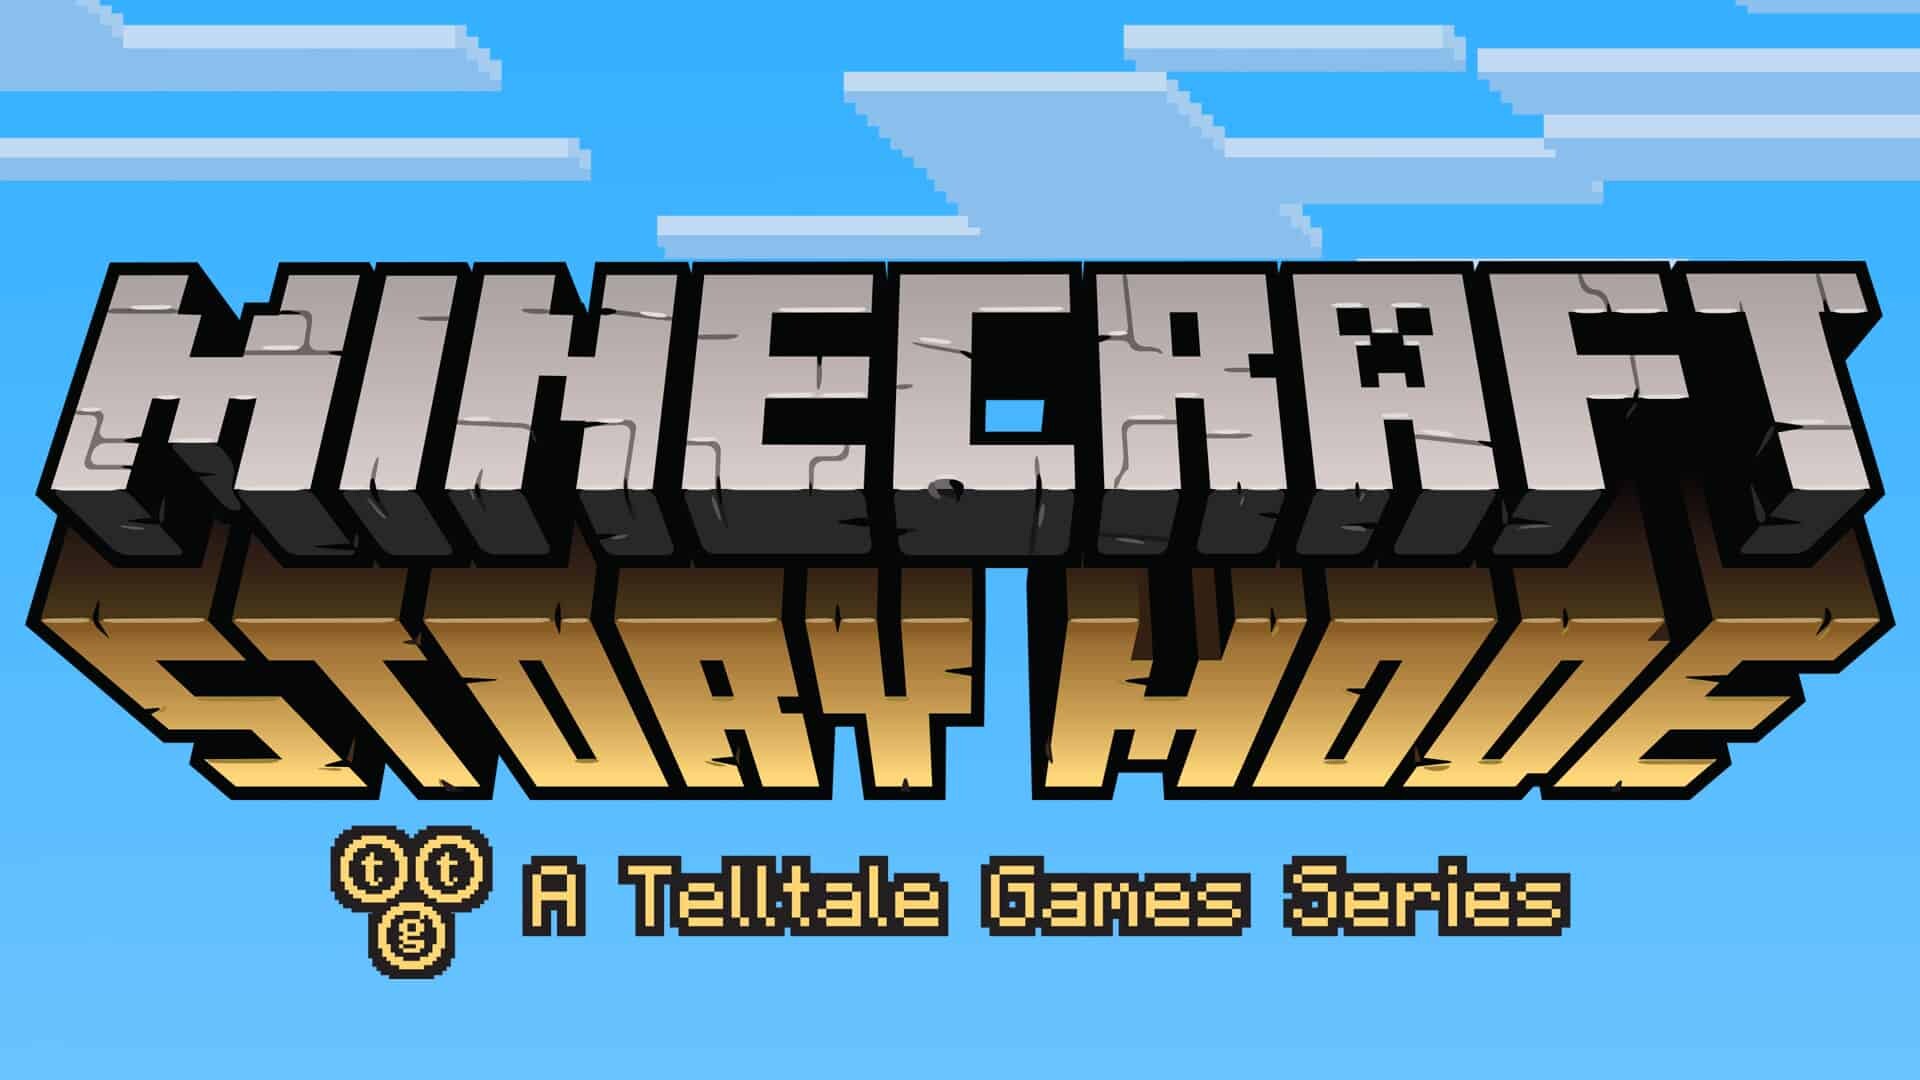 Minecraft: Story Mode Episode 3 trailer and release date details - Out now!